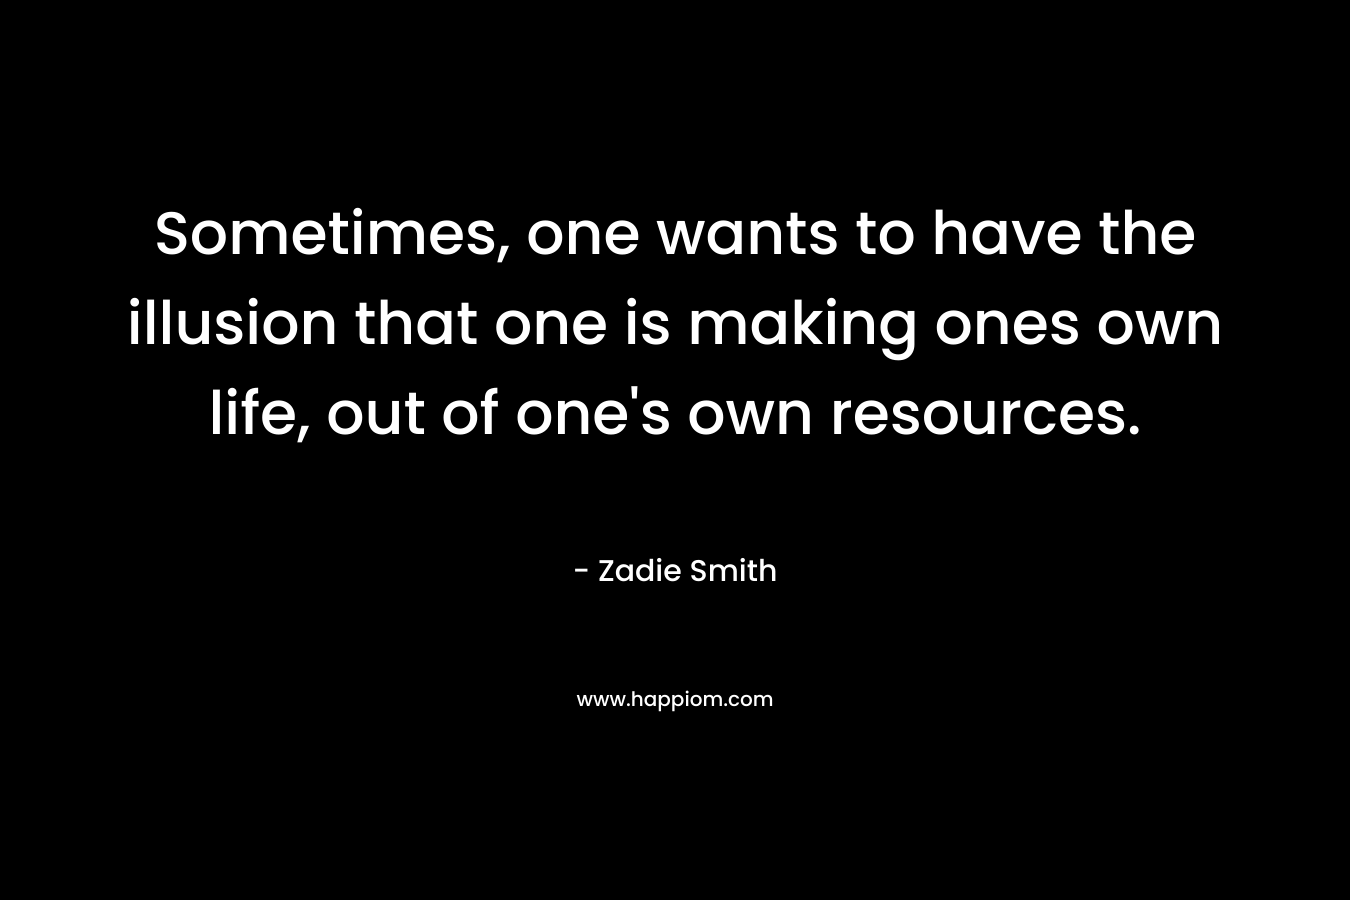 Sometimes, one wants to have the illusion that one is making ones own life, out of one’s own resources. – Zadie Smith